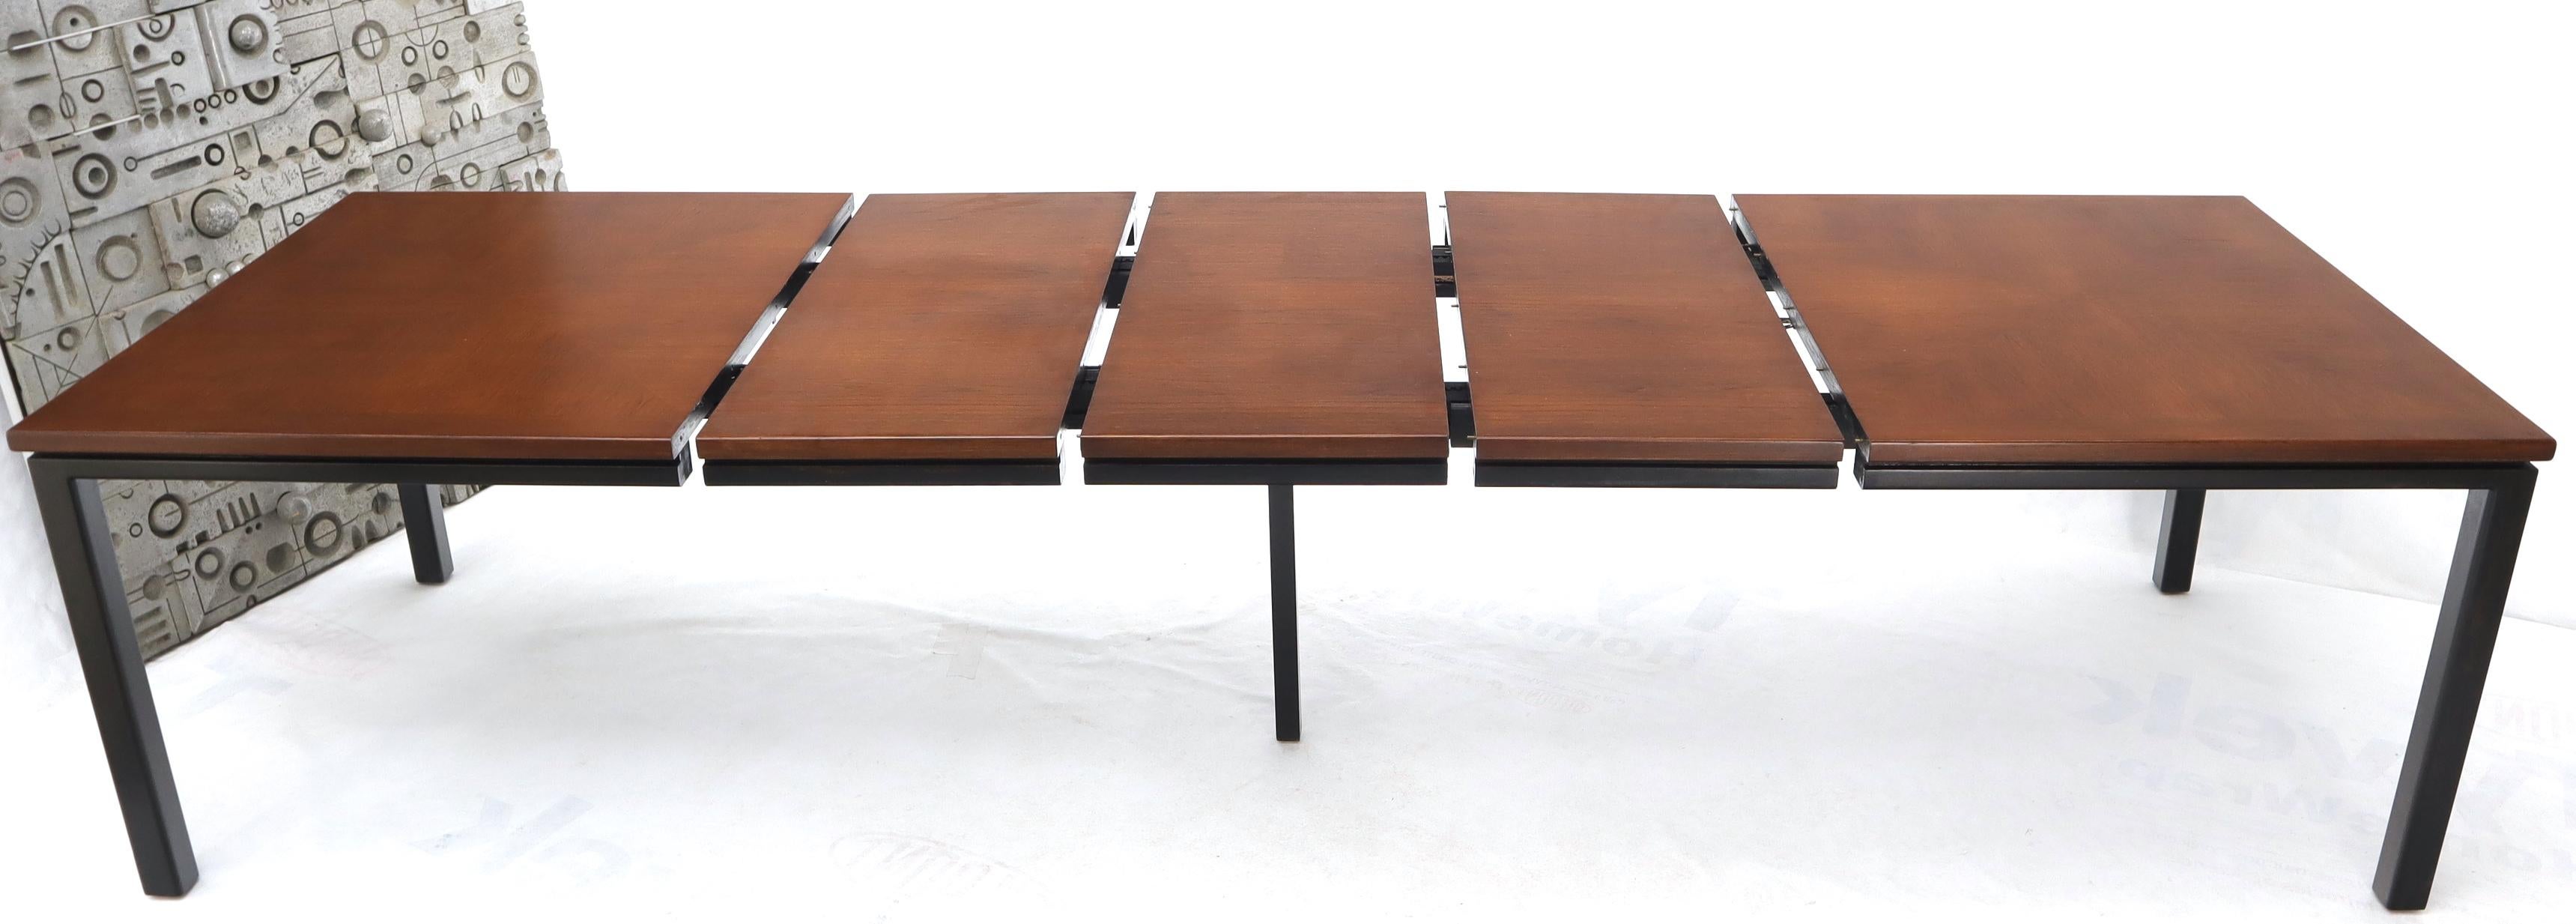 Mid-Century Modern Large Rectangle Expandable Dining Table 3 Extension Boards Atr. Harvey Probber